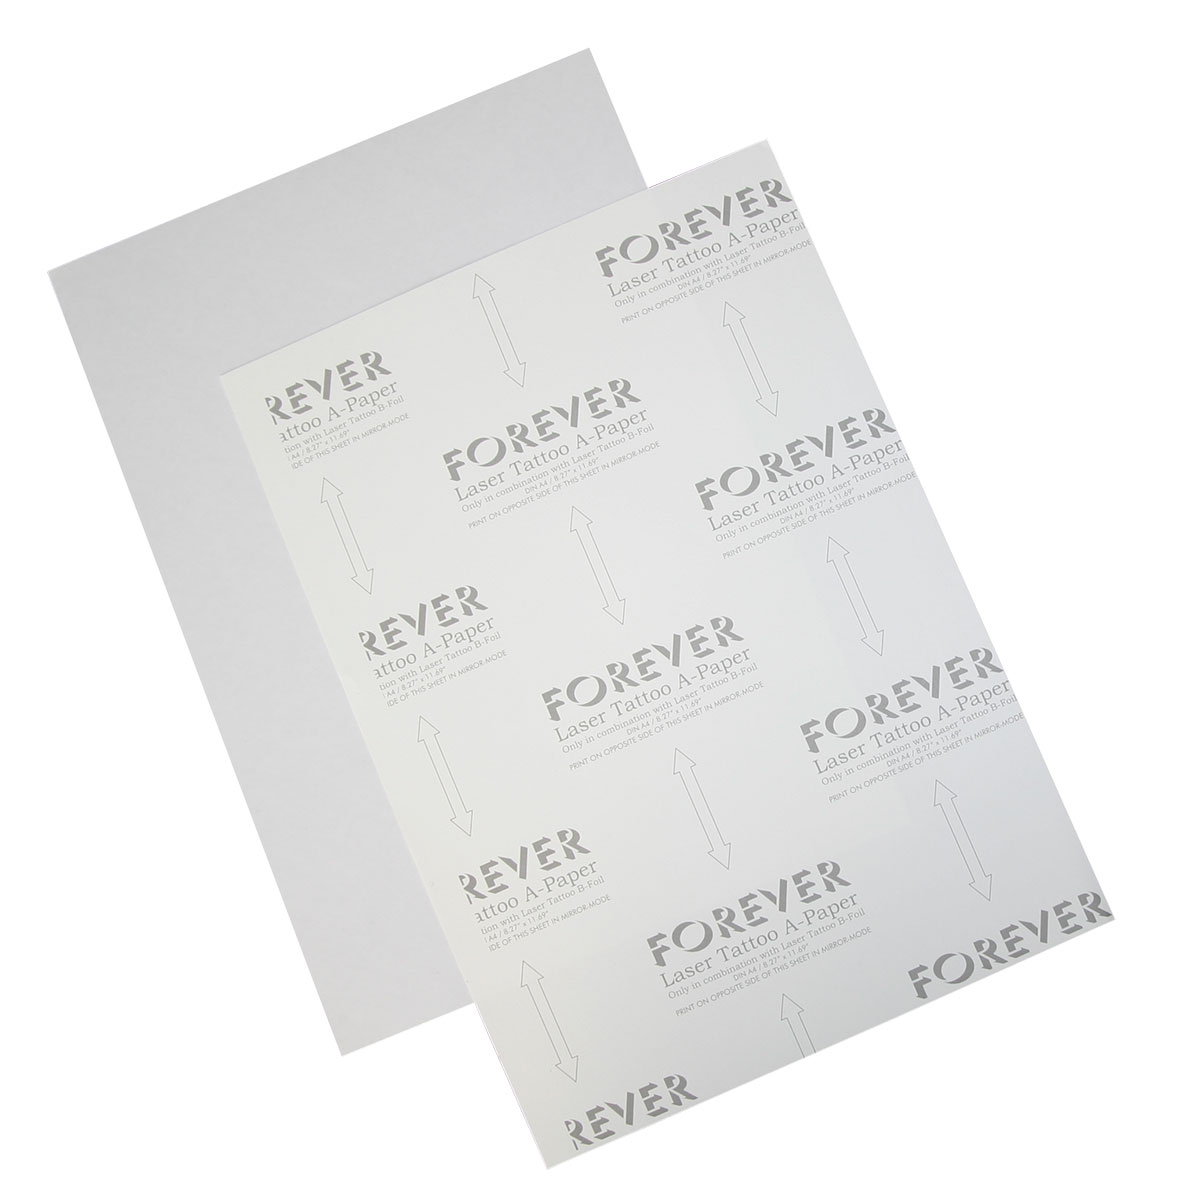 Removable tattoo paper for laser printers Brand: FOREVER Dimension